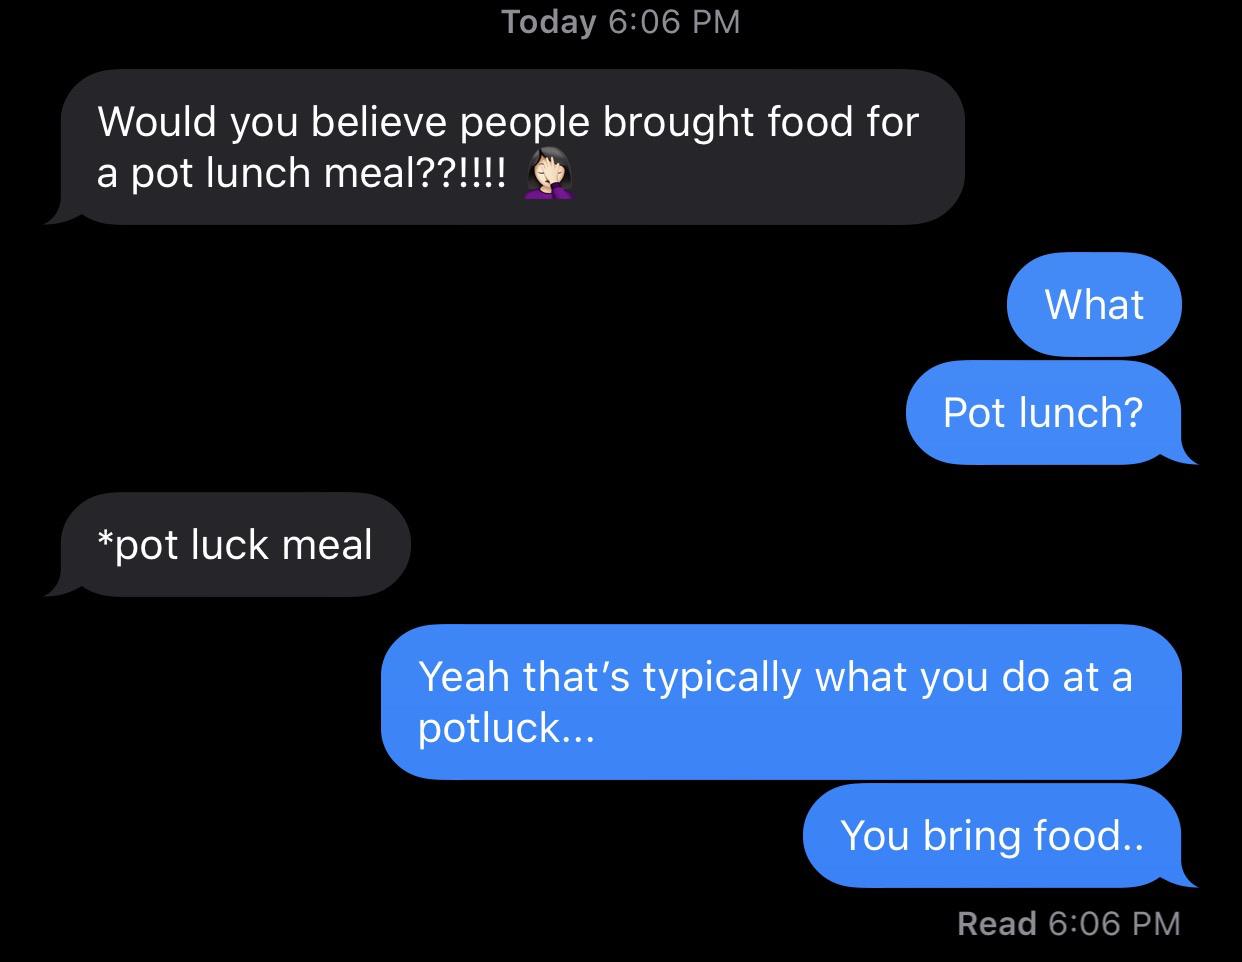 multimedia - Today Would you believe people brought food for a pot lunch meal??!!!! What Pot lunch? pot luck meal Yeah that's typically what you do at a potluck... You bring food.. Read